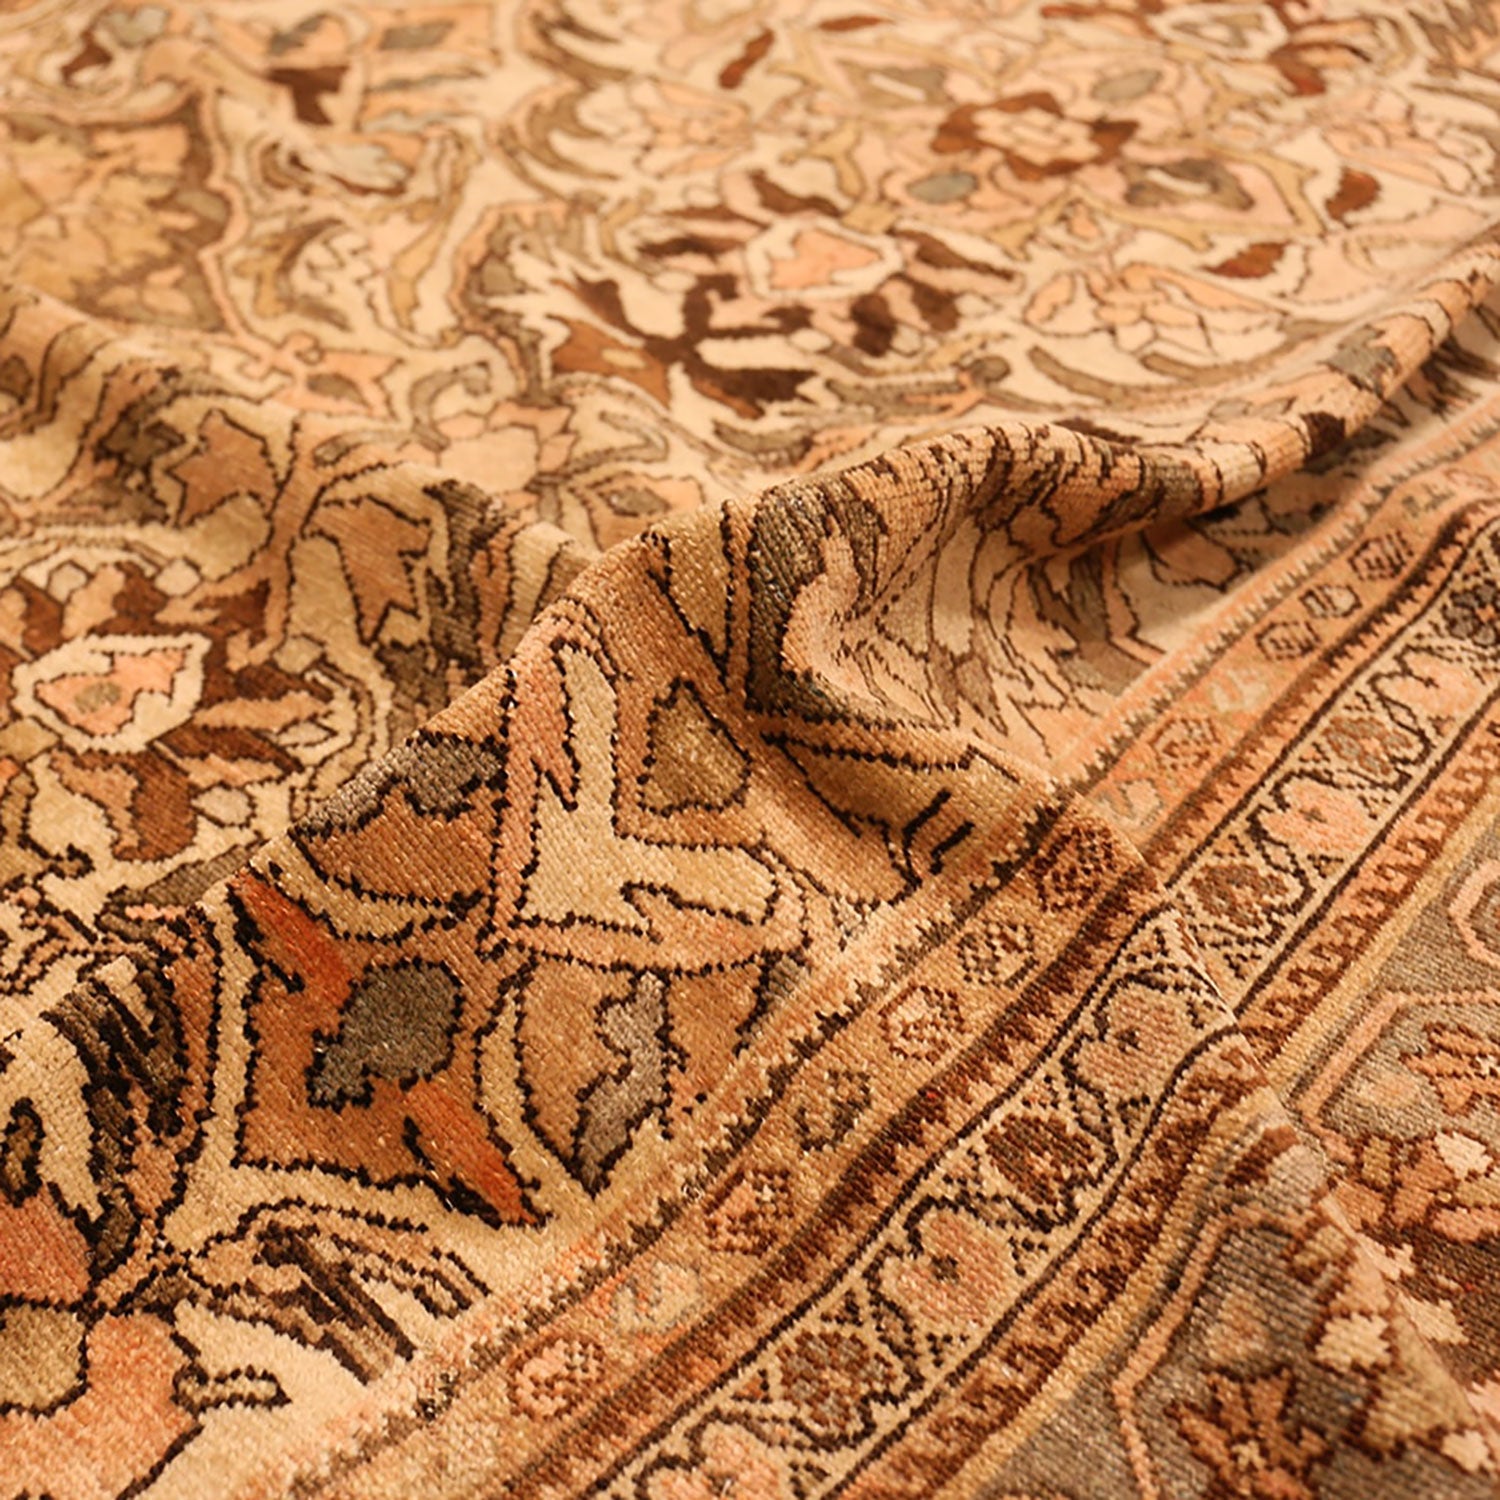 Close-up of an ornate Oriental rug with intricate floral patterns.